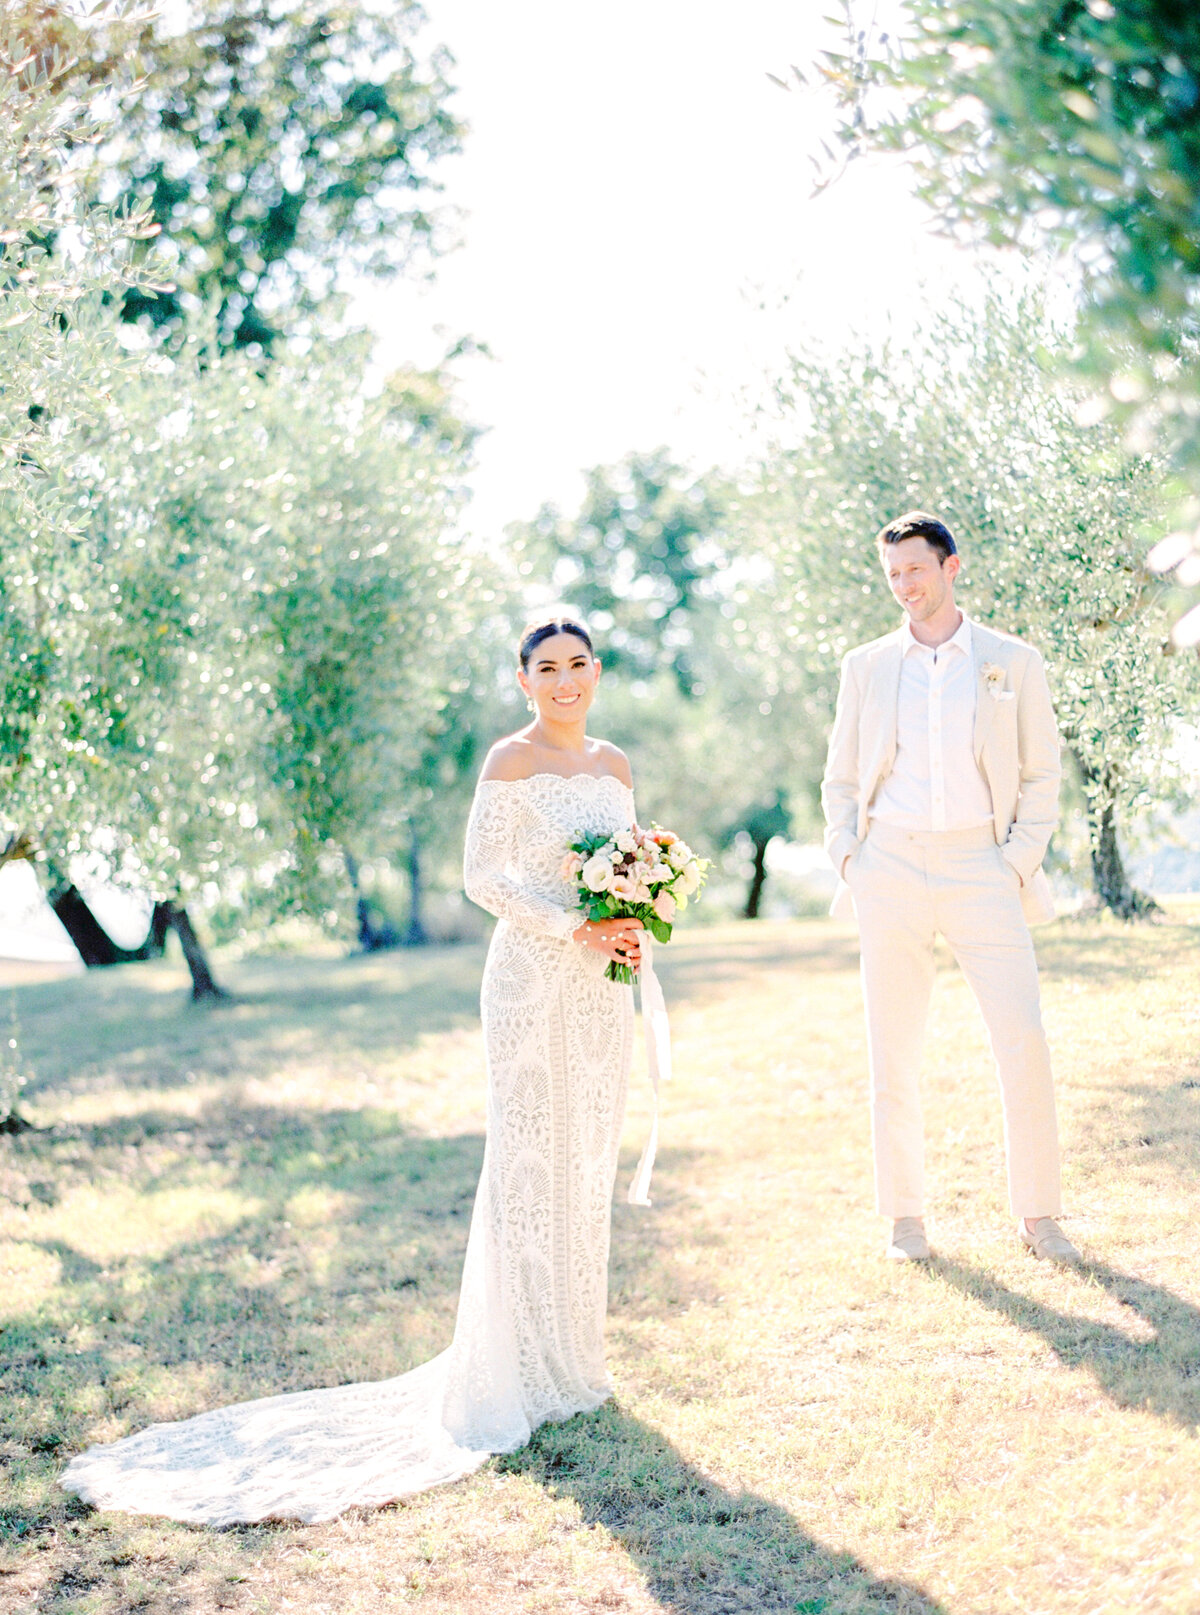 Film photograph of bride in all lace long sleeved off the shoulder wedding dress standing in the sun while the groom in a soft light tan wedding suite looks at her adoringly photographed by Italy wedding photographer at Villa Montanare Tuscany wedding